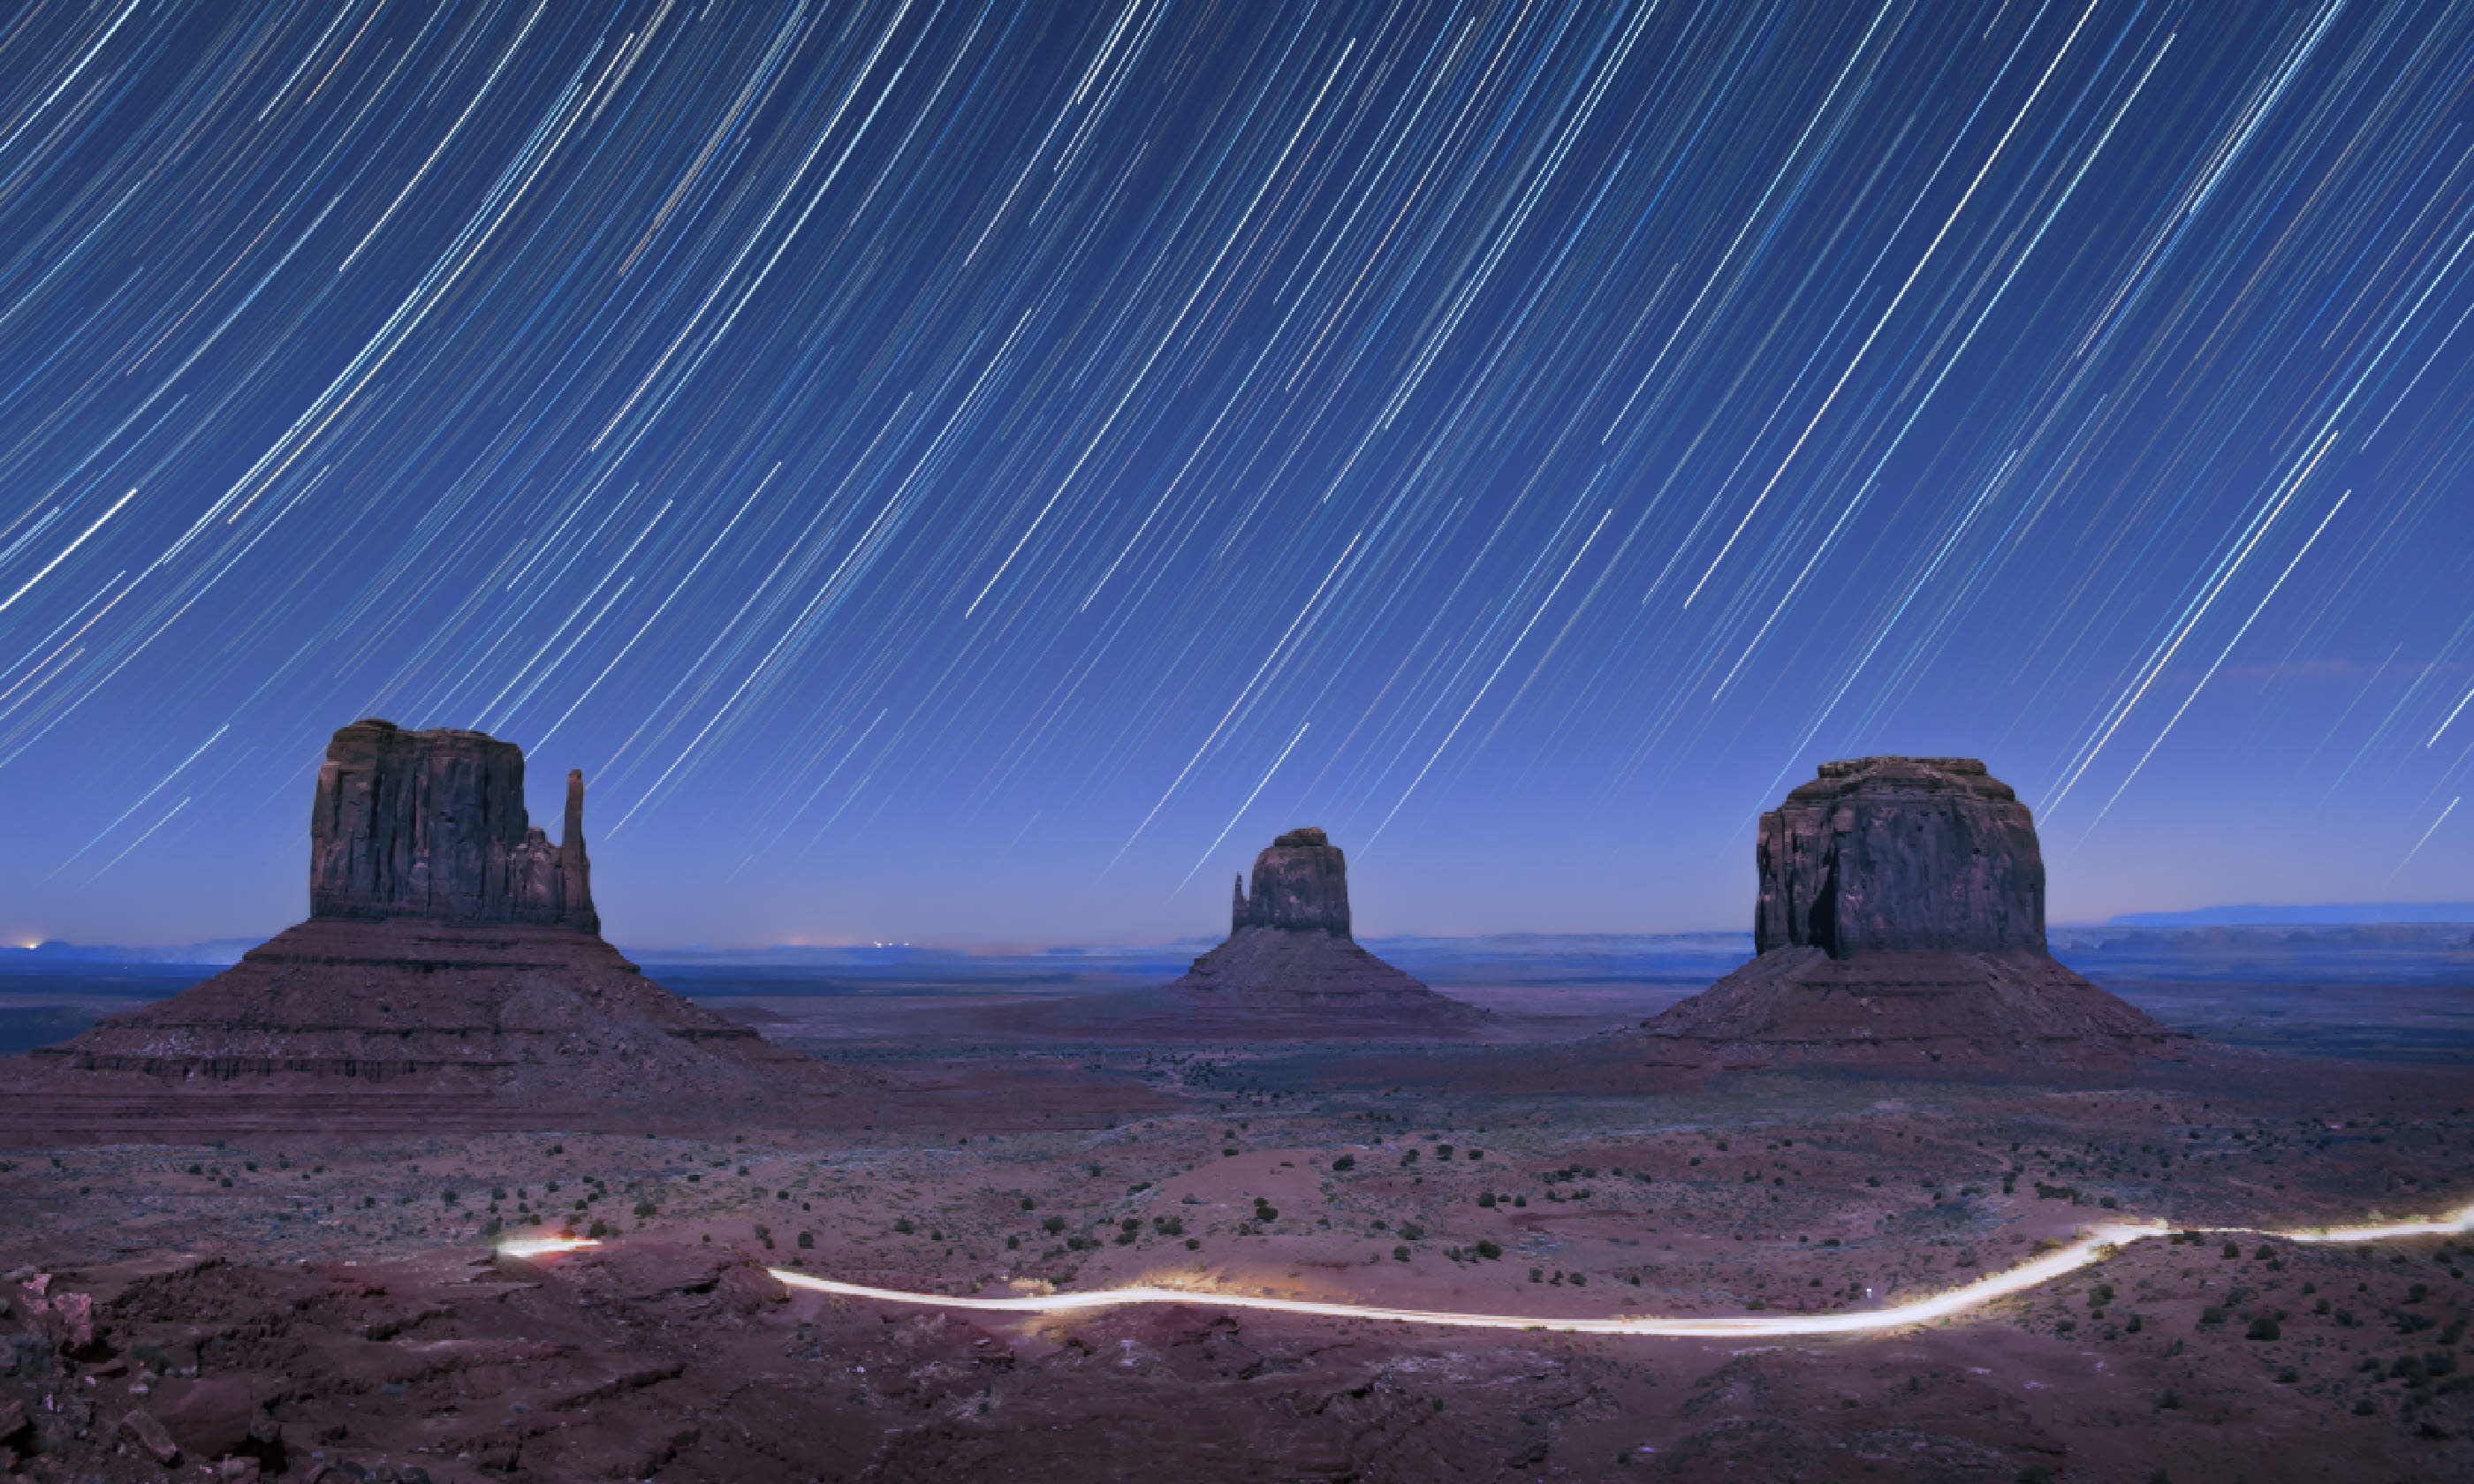 Star trails in the night over Monument Valley, USA (Shutterstock: see credit below)